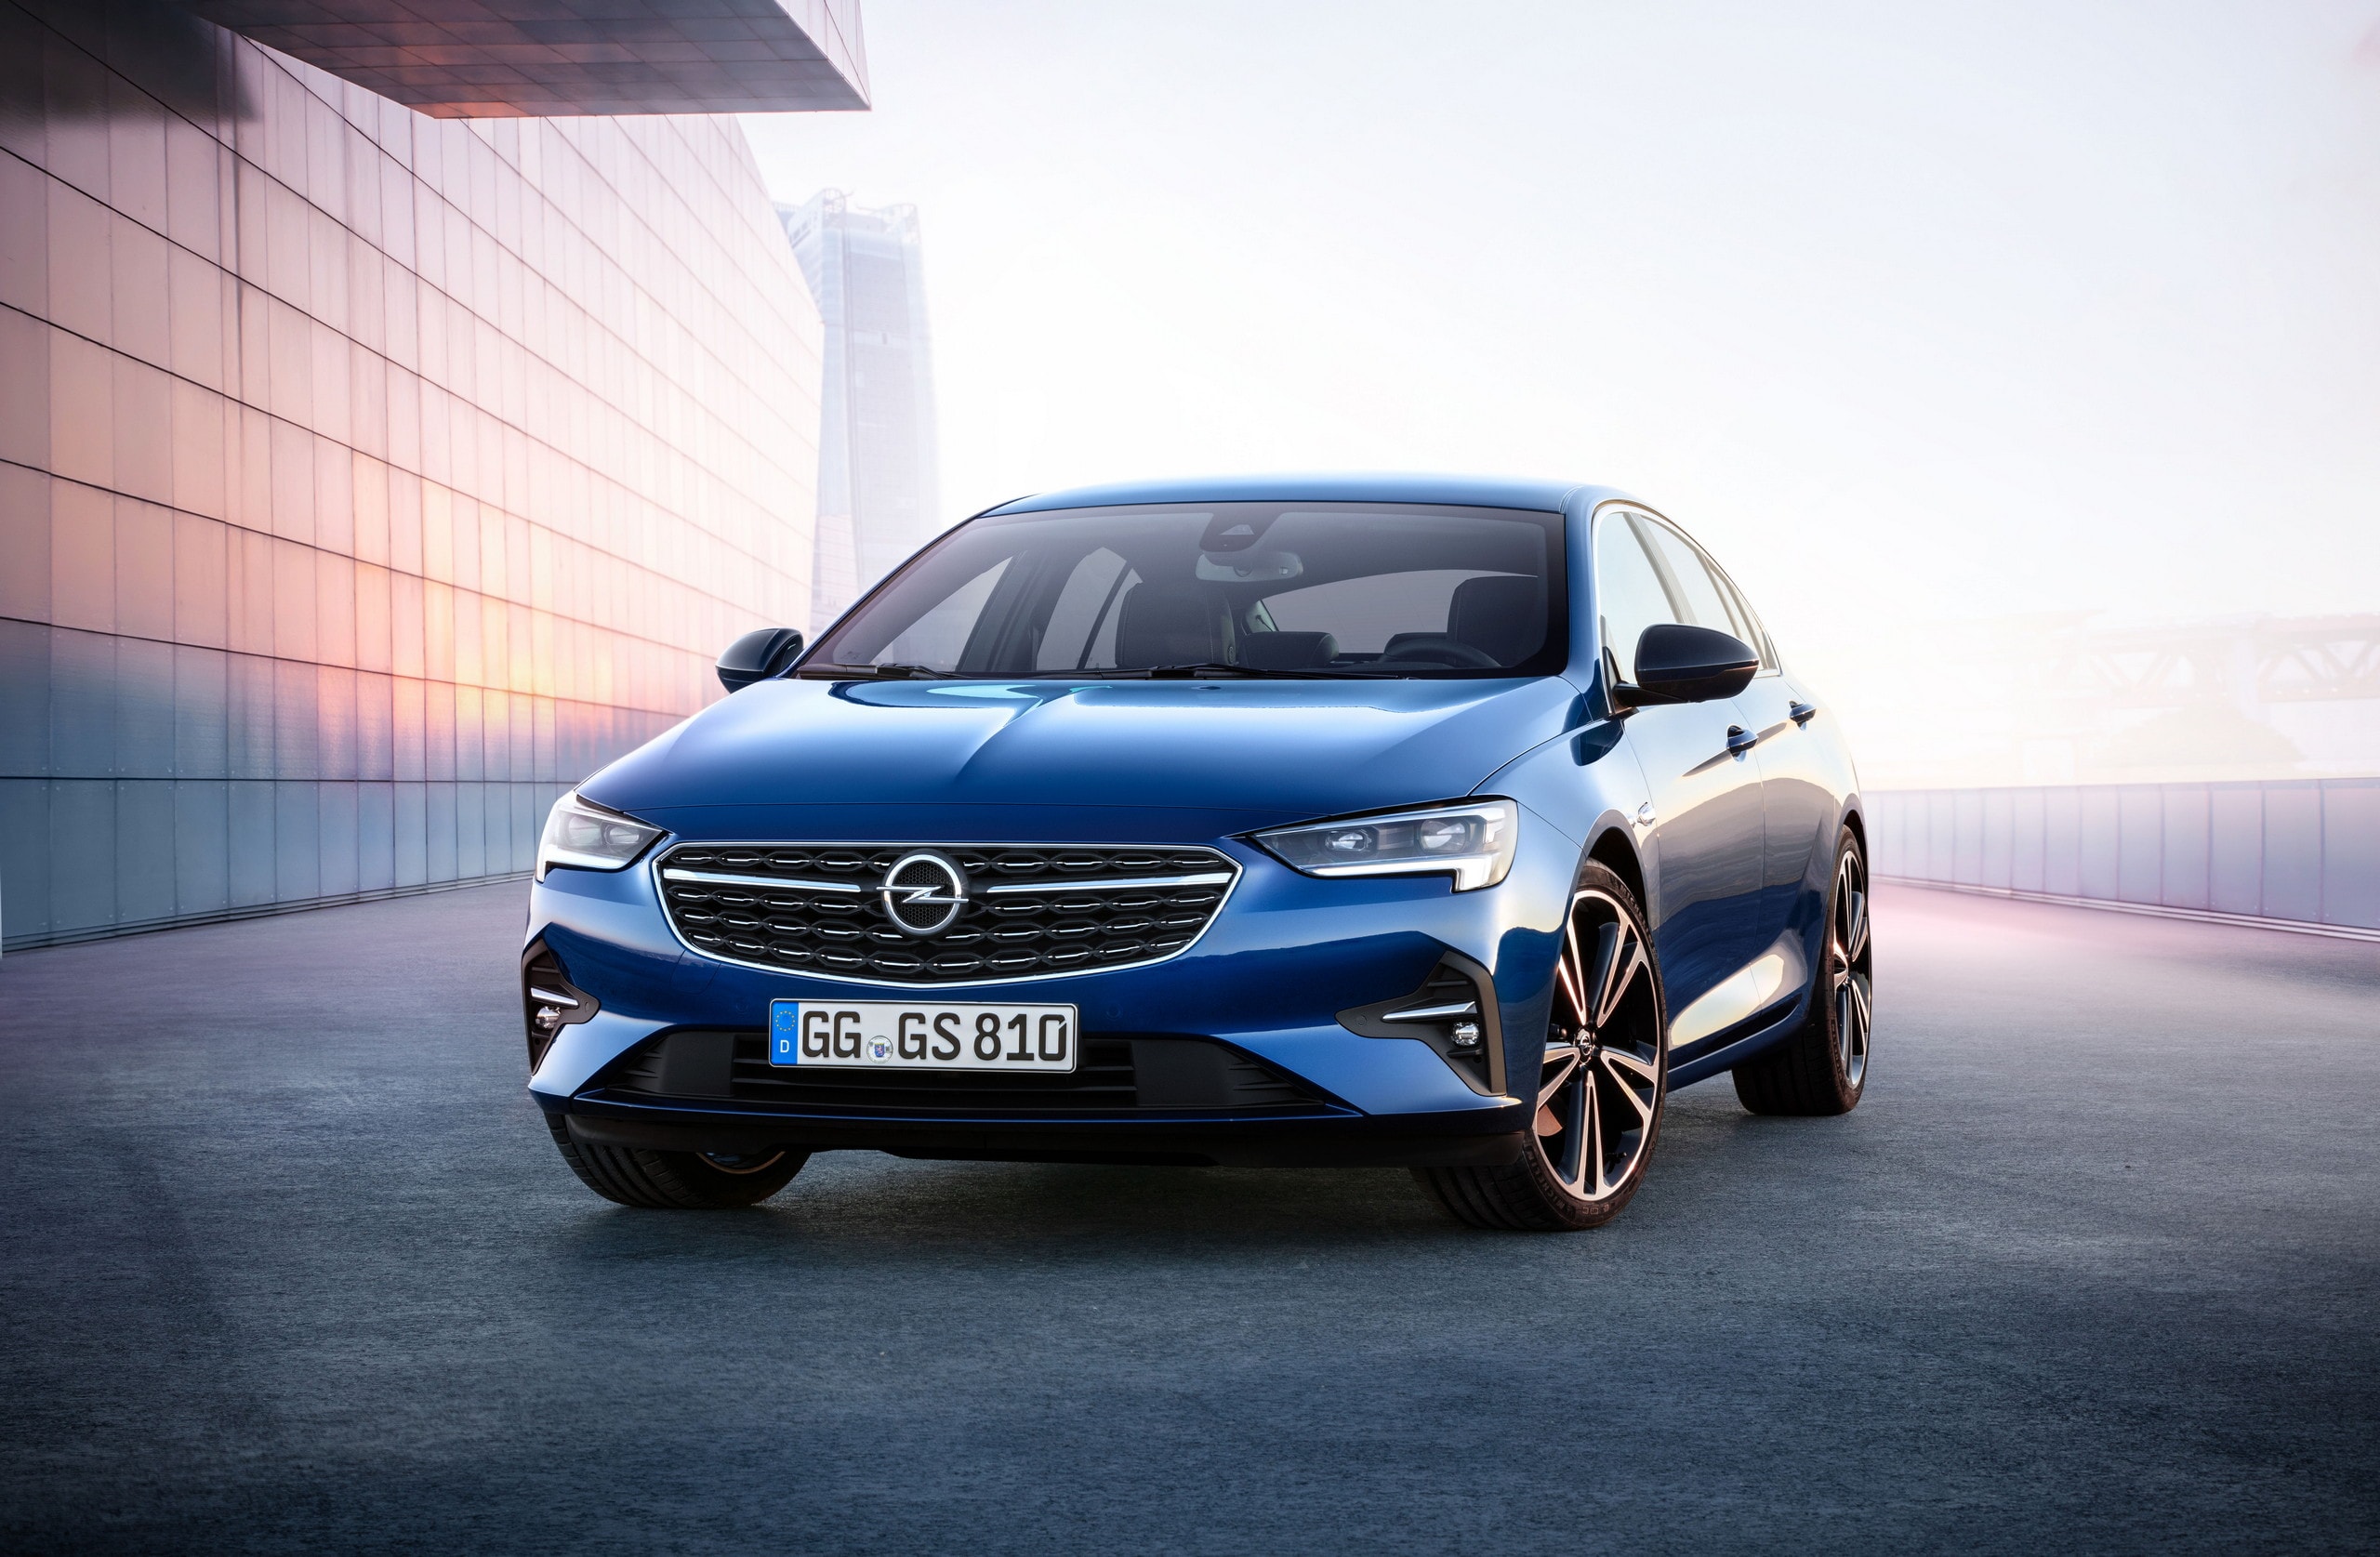 Opel Insignia Production To End This Year: Official